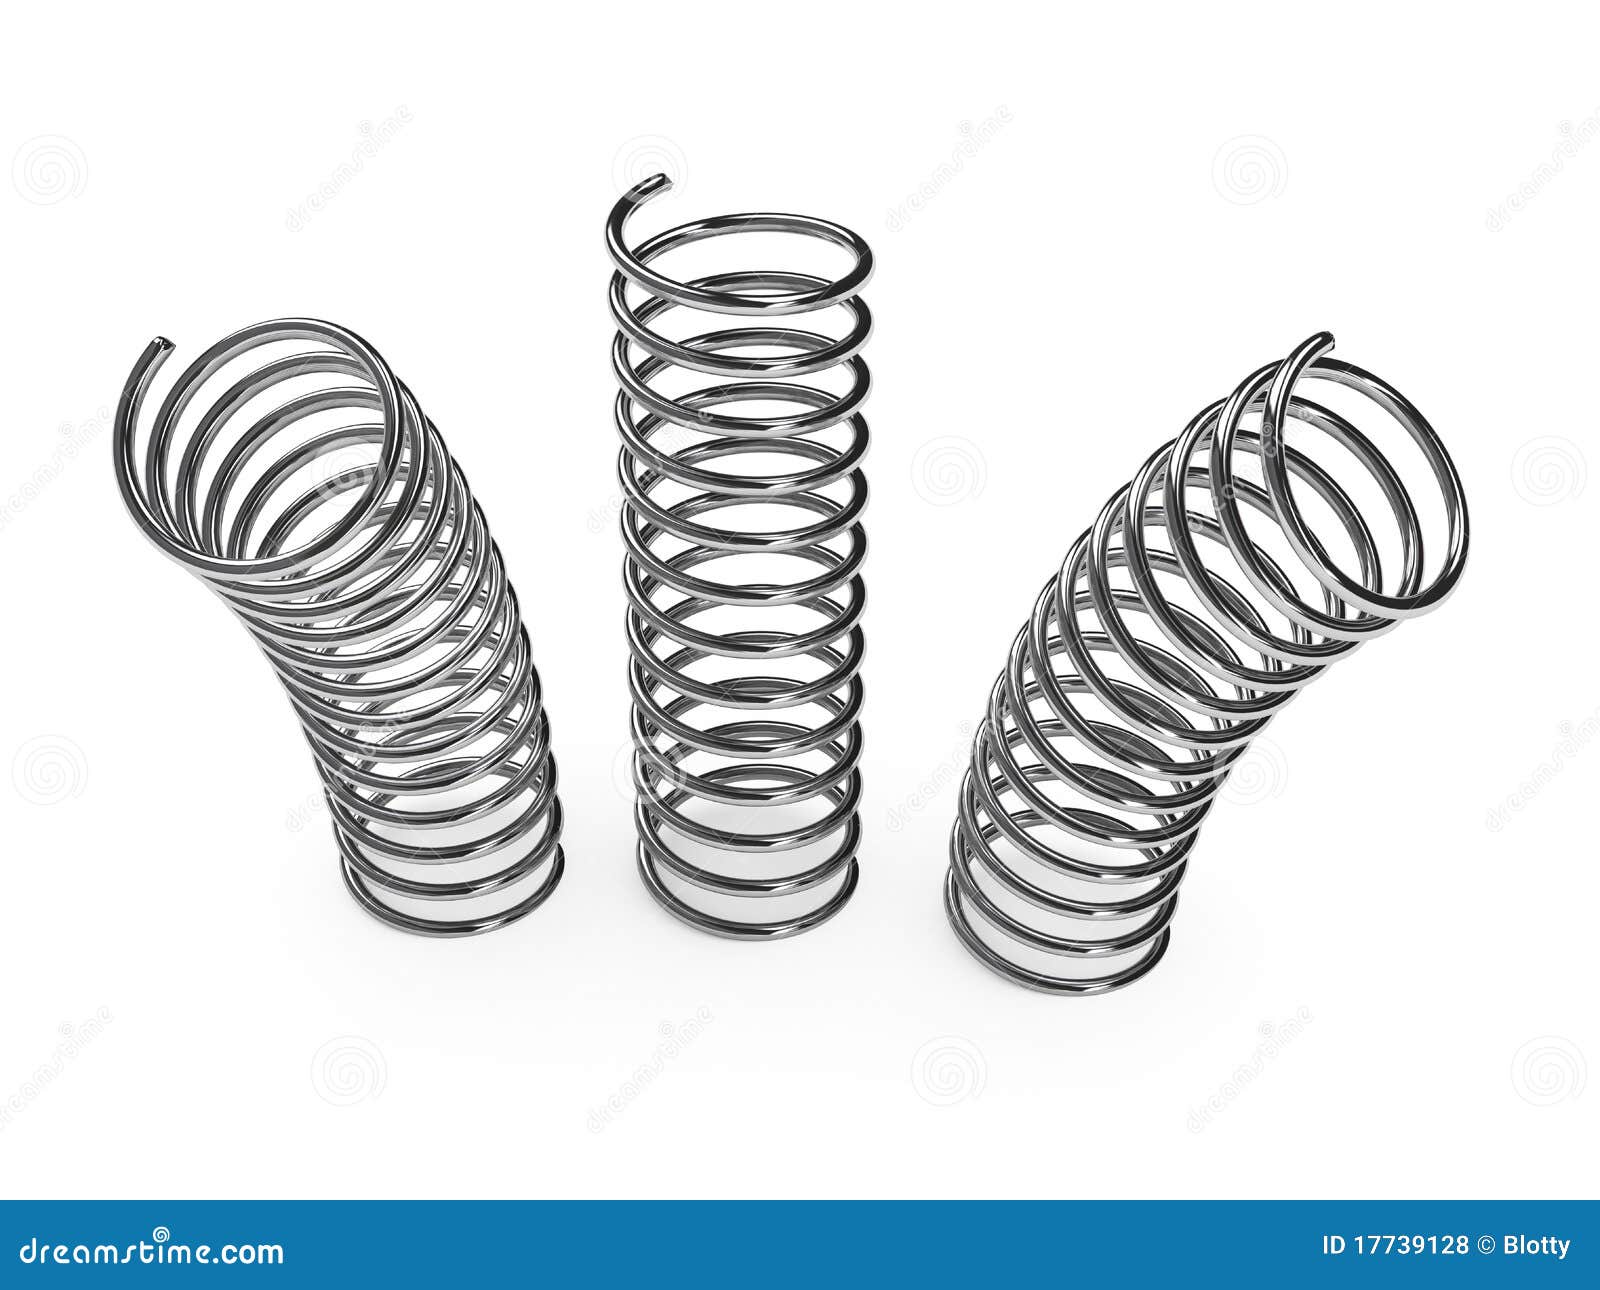 free clipart coil spring - photo #37